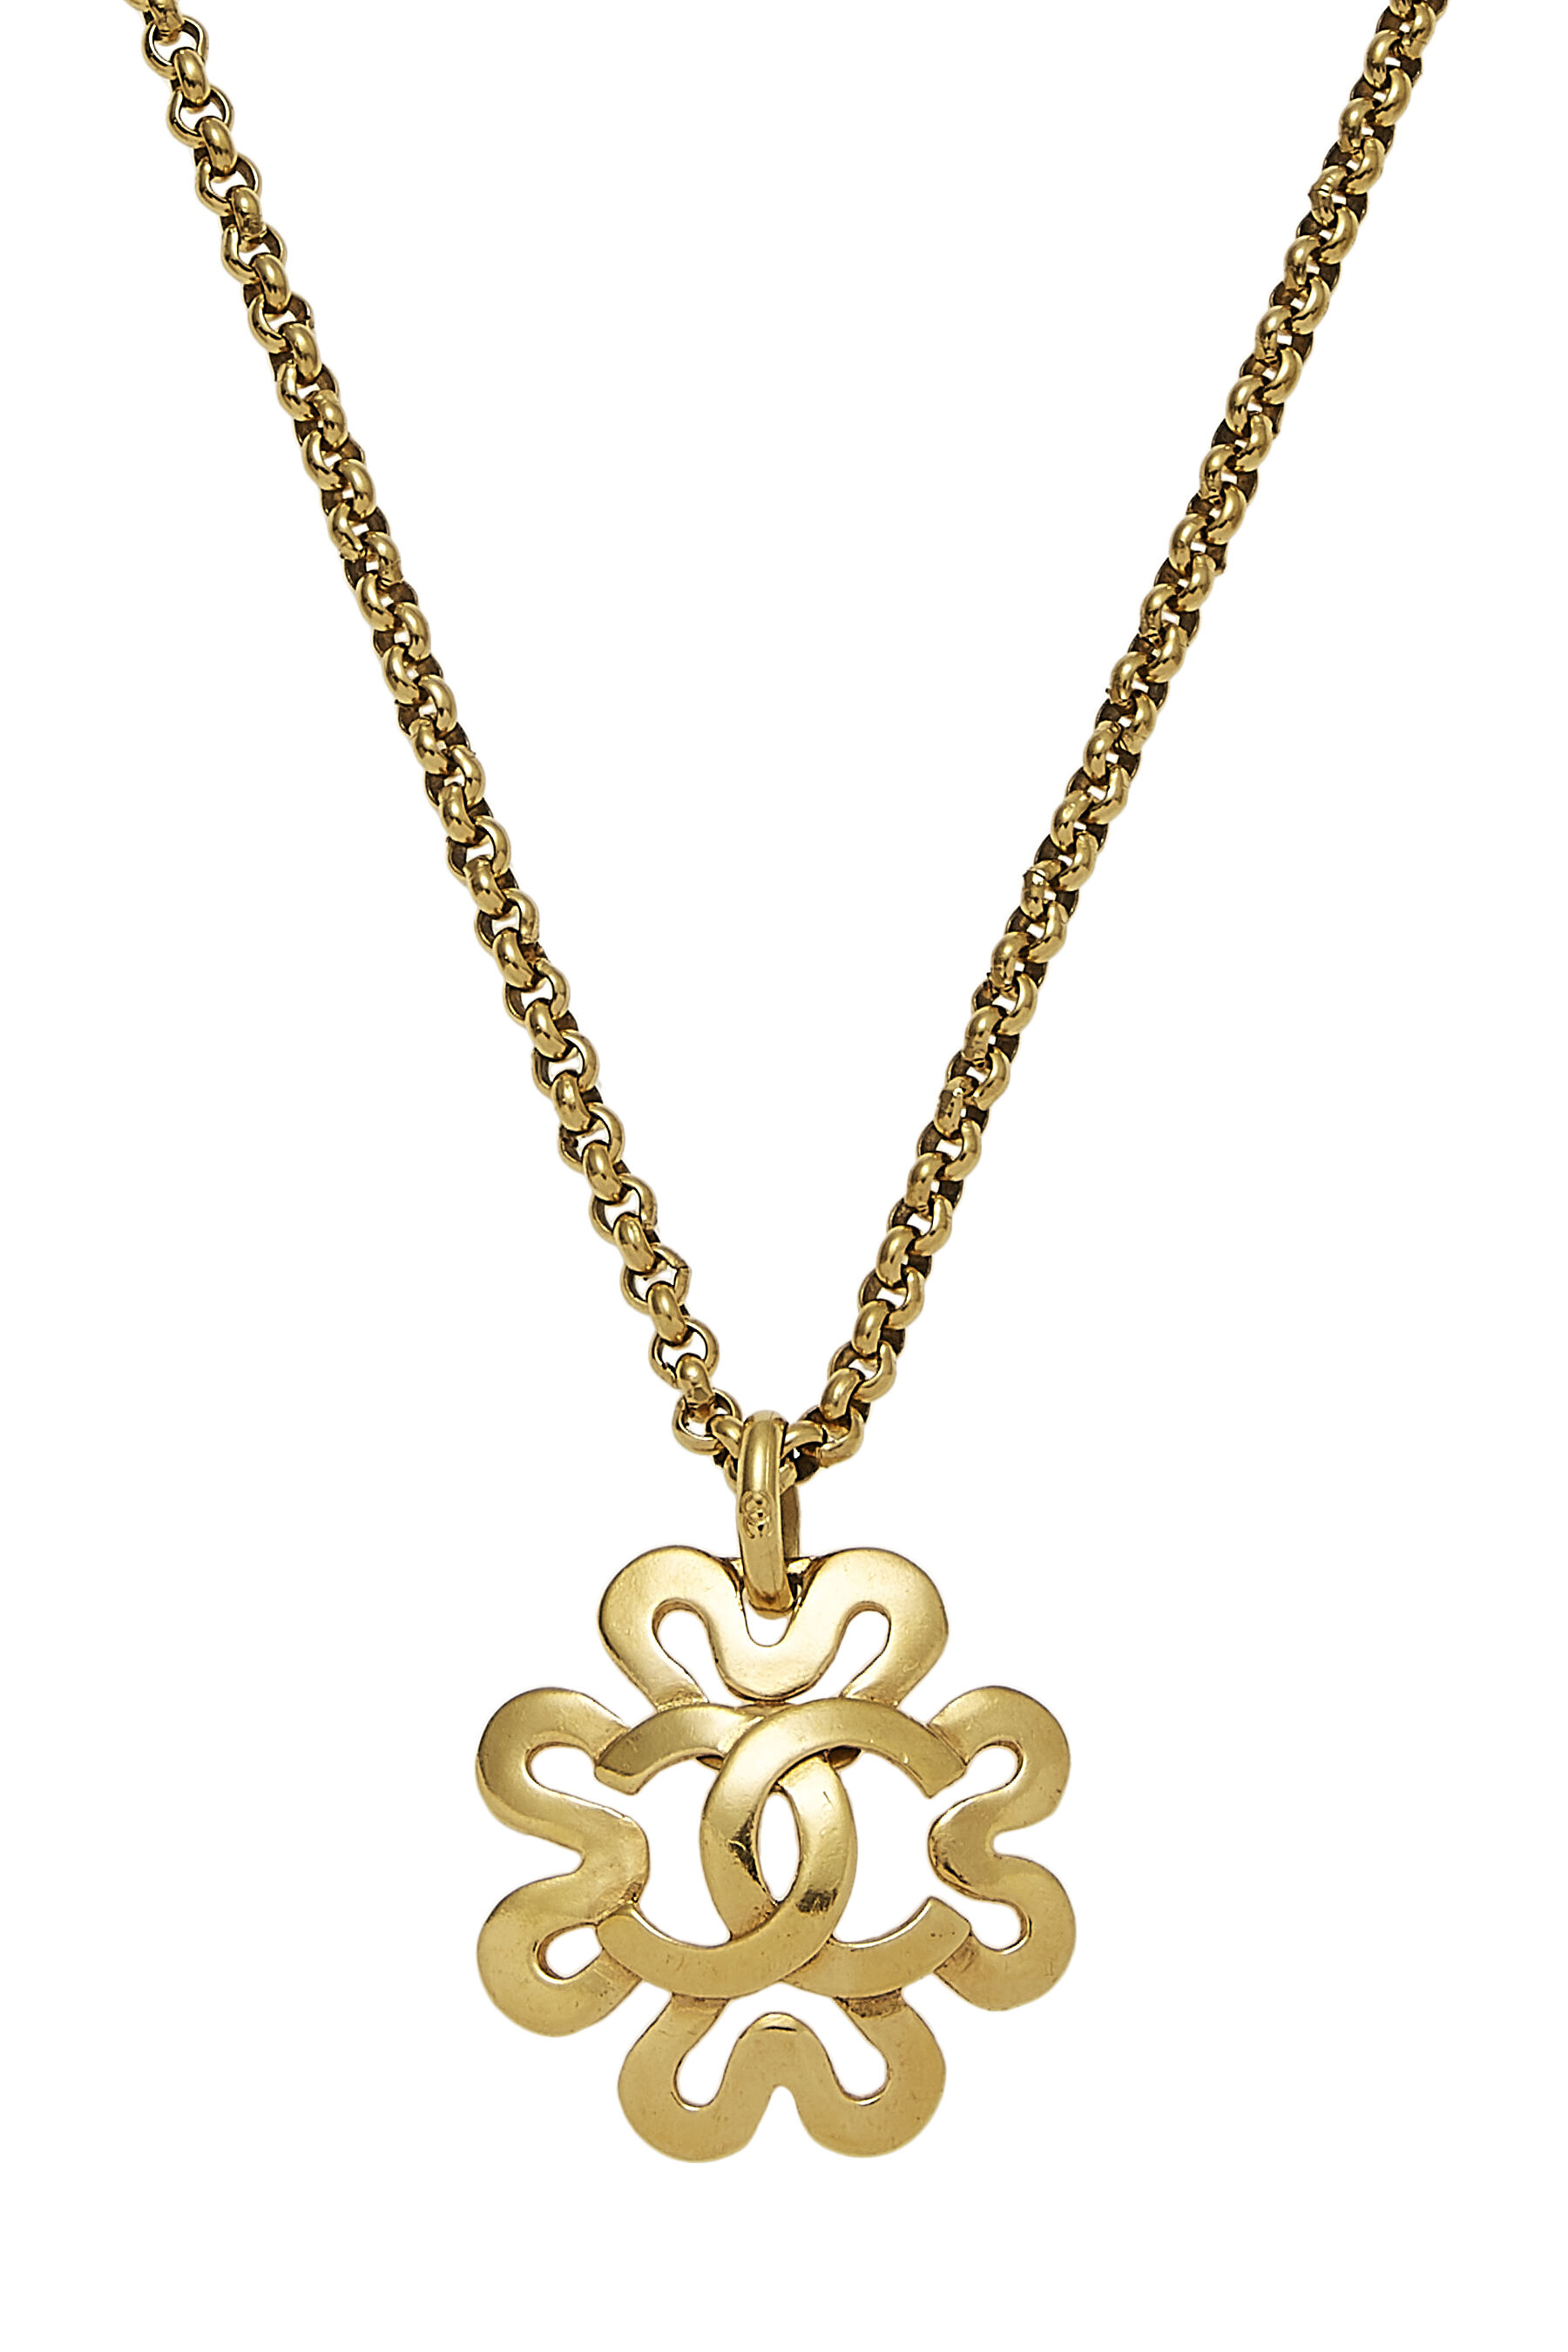 Chanel Set Chain Necklace with "CC" Pendant and Earrings. France